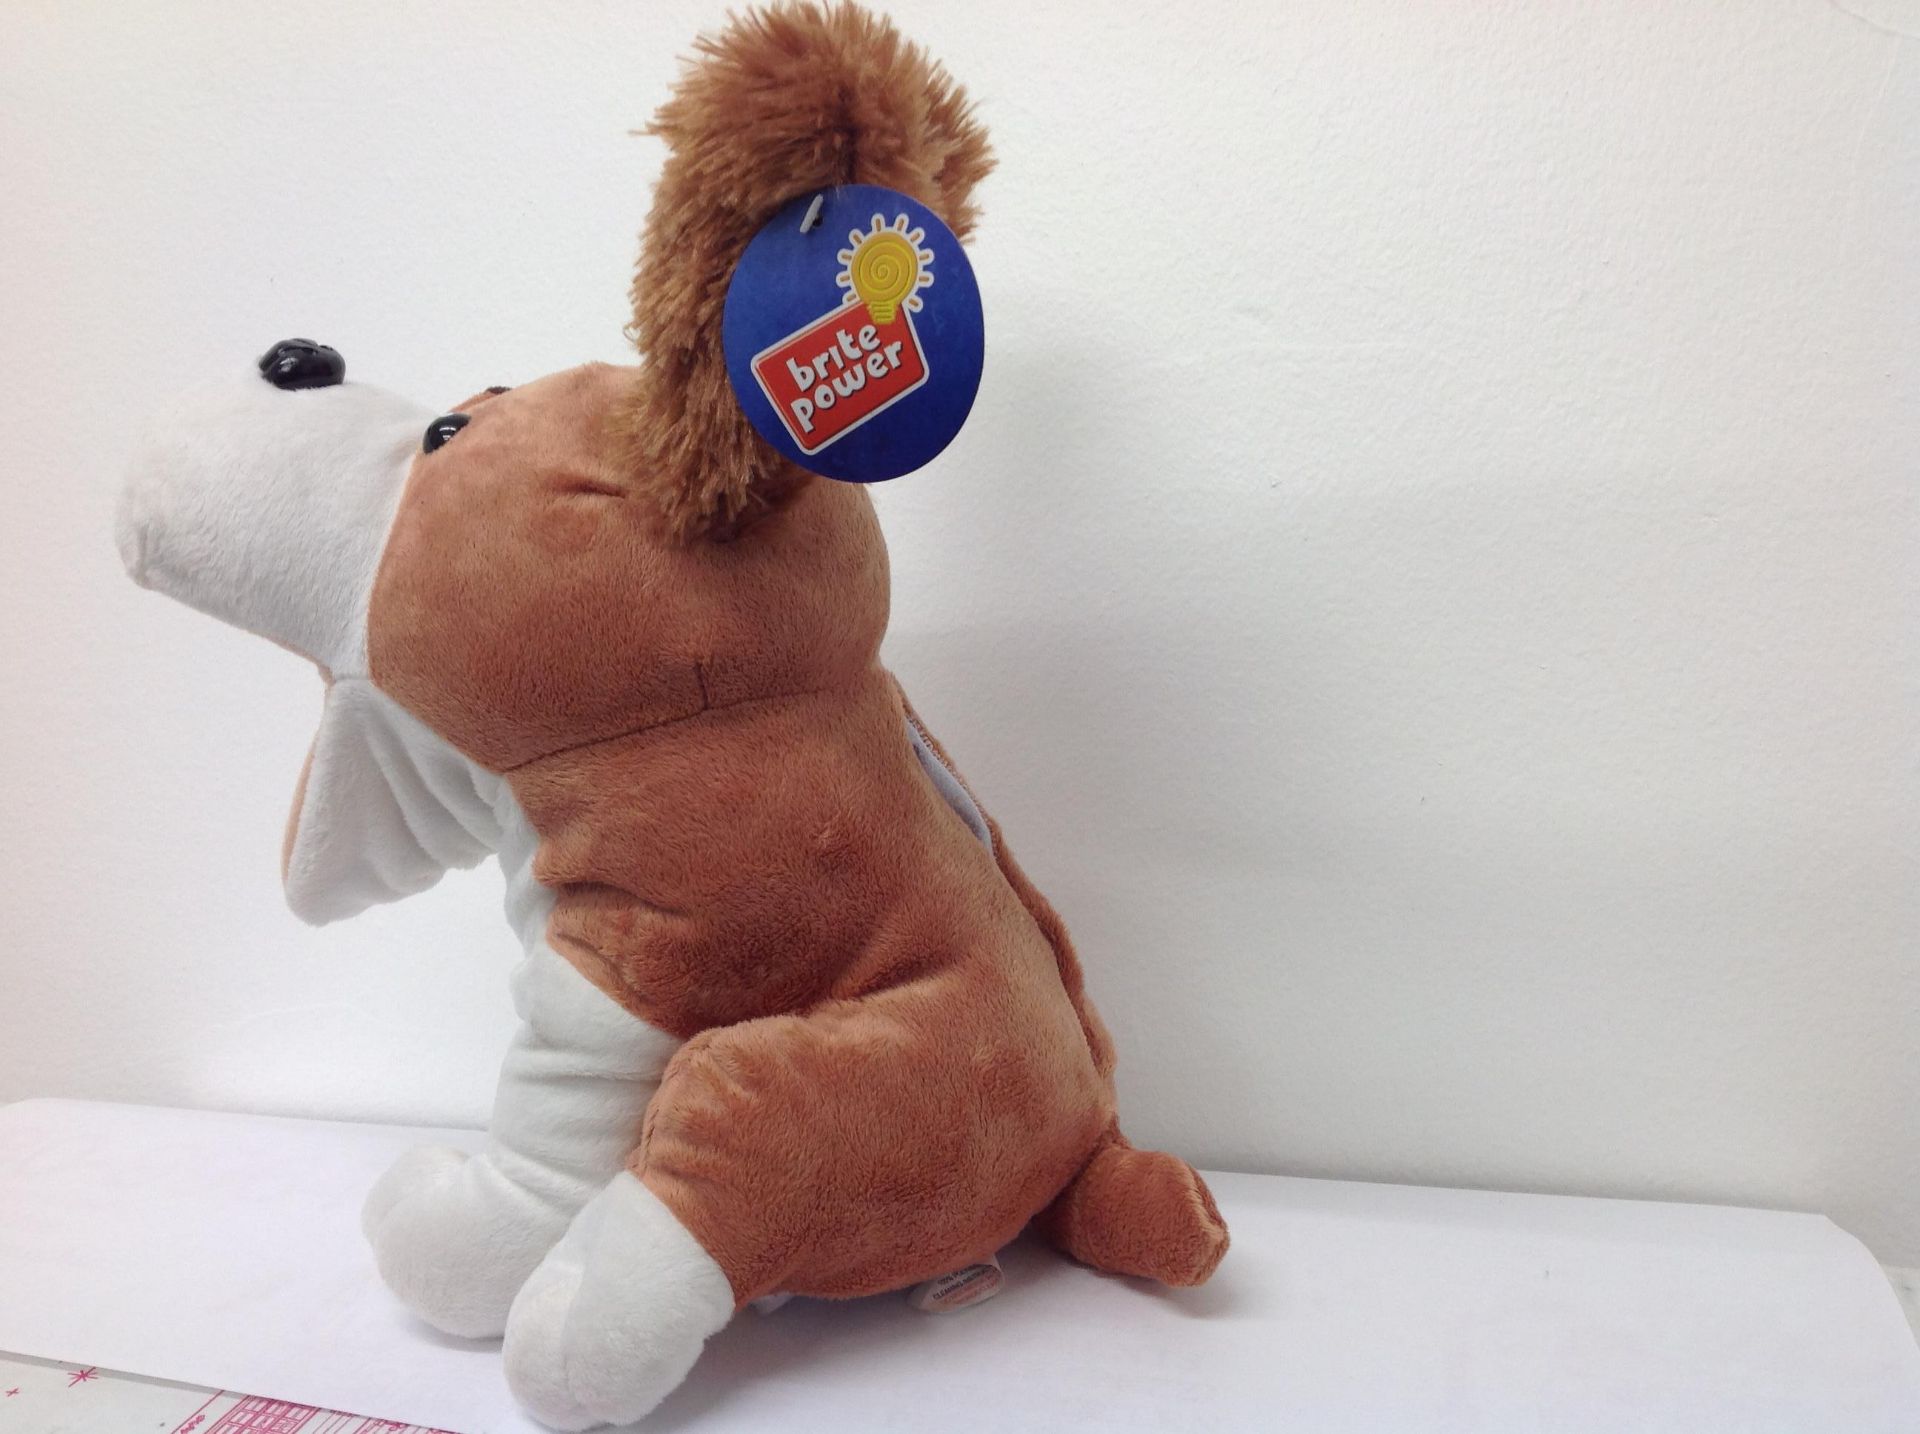 20 x Brite Power Talking Large Dog Hand Puppet. Brand new stock. RRP £19.99 each, total original RRP - Image 3 of 4